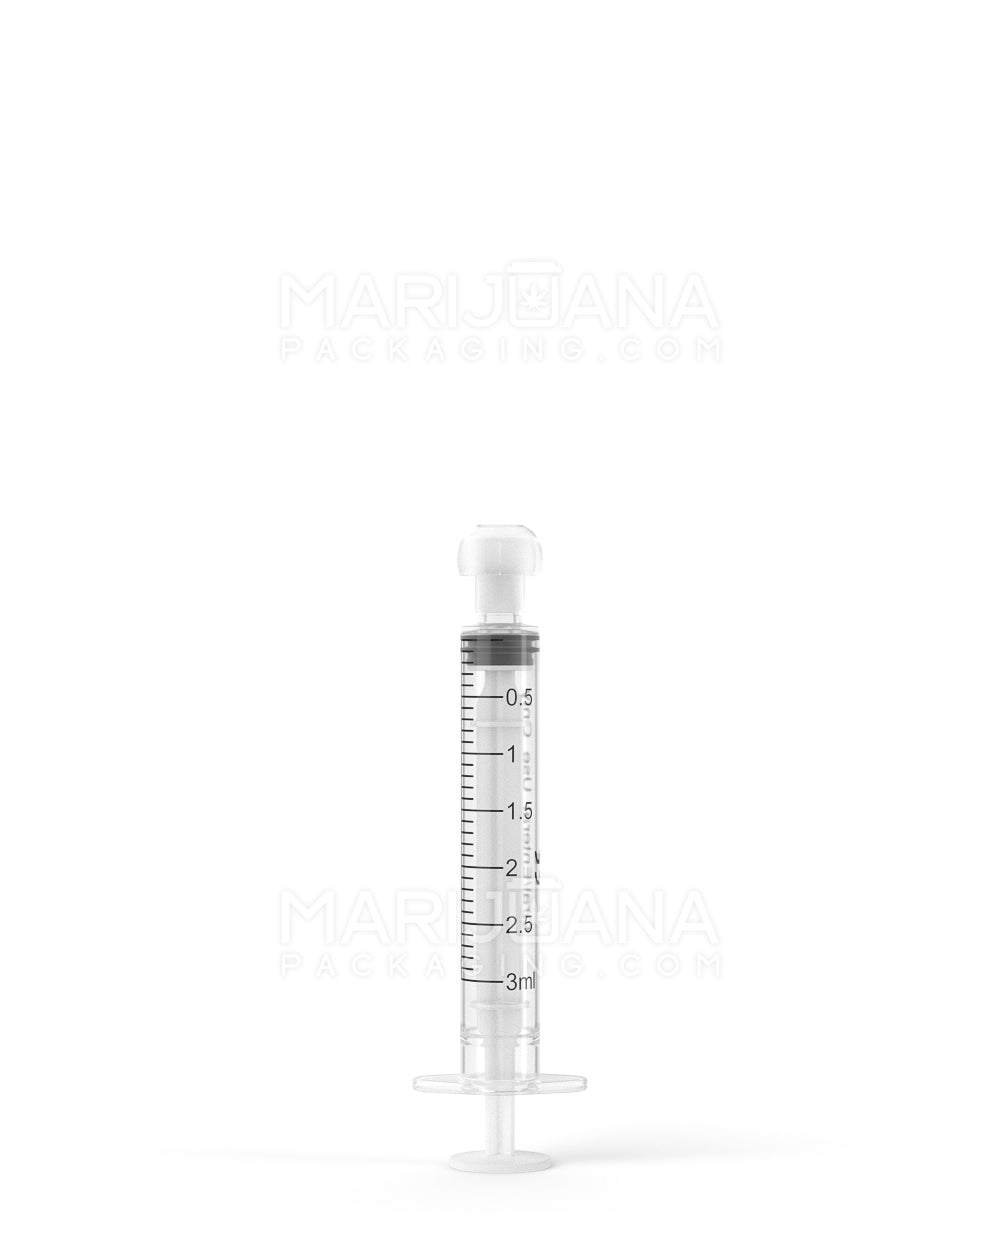 Plastic Oral Concentrate Syringes | 3mL - 0.5mL Increments - 100 Count - 8